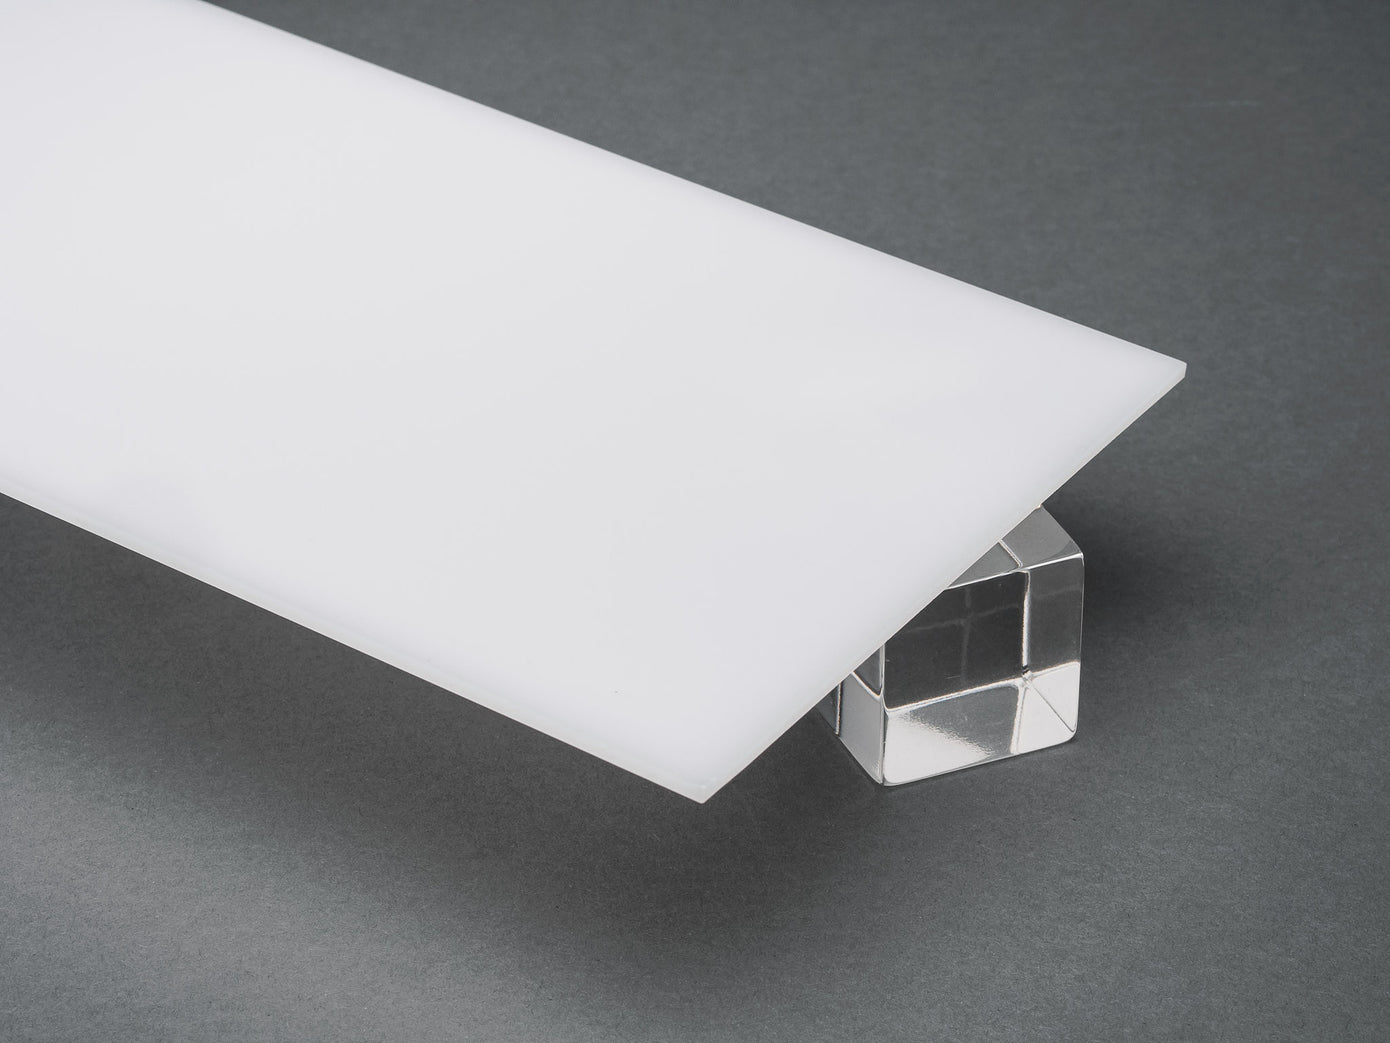 6 7/8 X 8 7/8 X 1/16 Thick Acrylic Sheets Use as a Replacement for